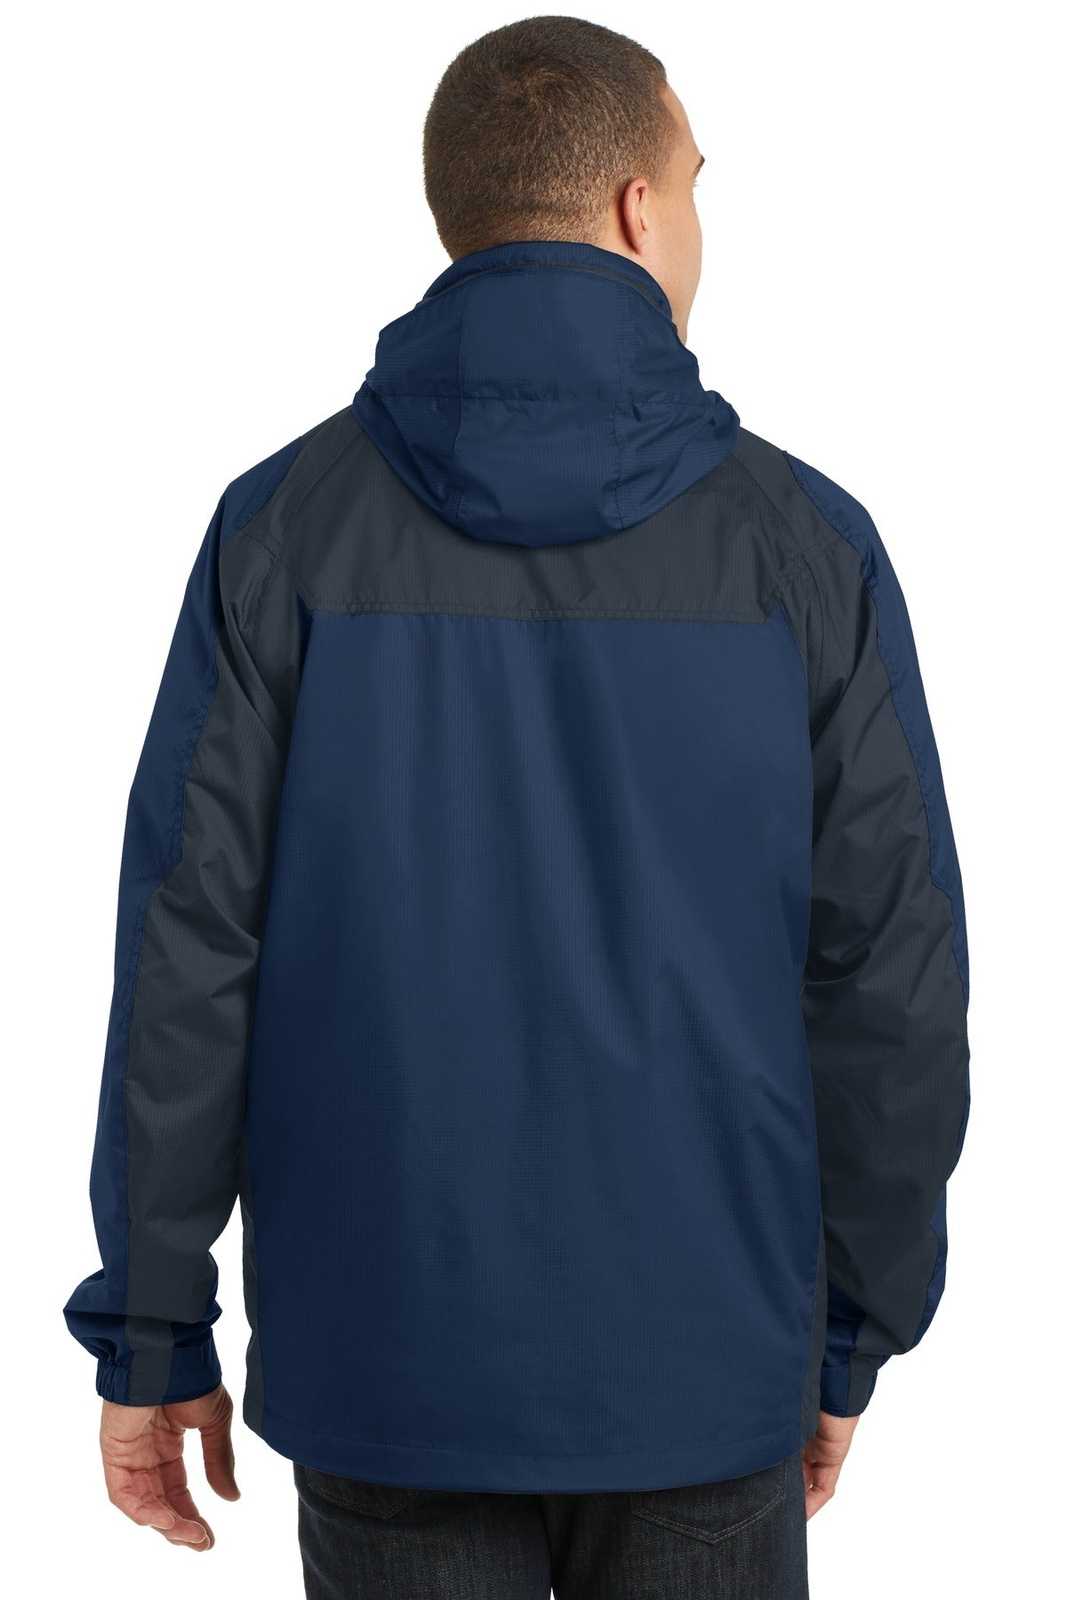 Port Authority J310 Ranger 3-in-1 Jacket - Insignia Blue Navy Eclipse - HIT a Double - 1